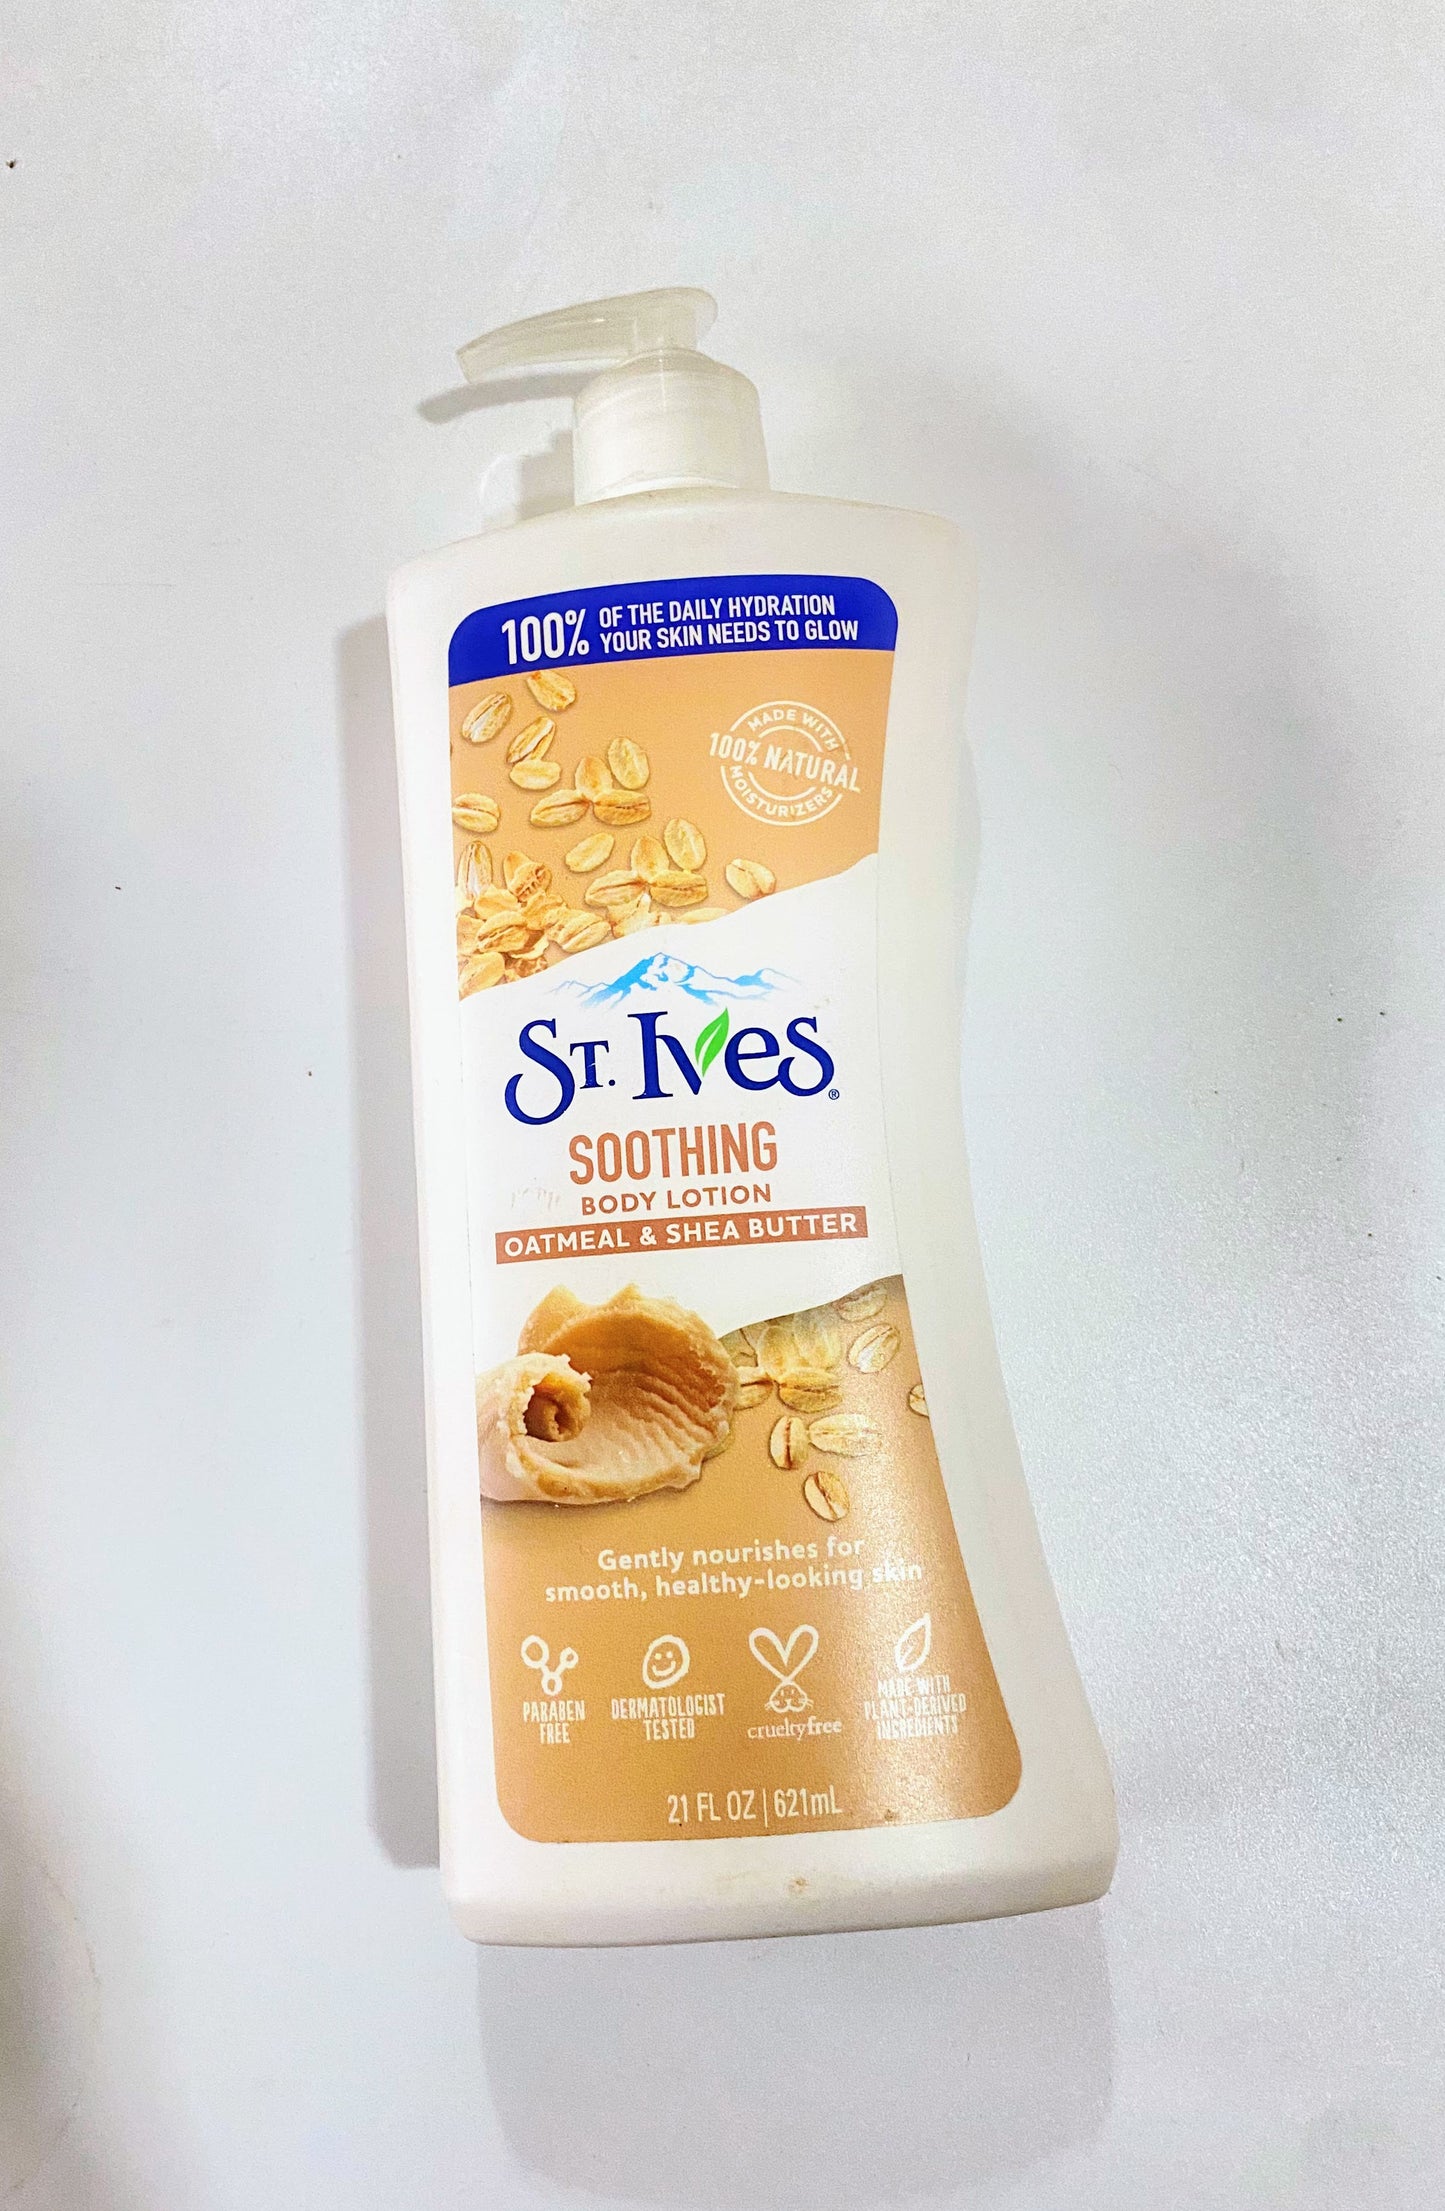 St Ives Soothing Body Lotion